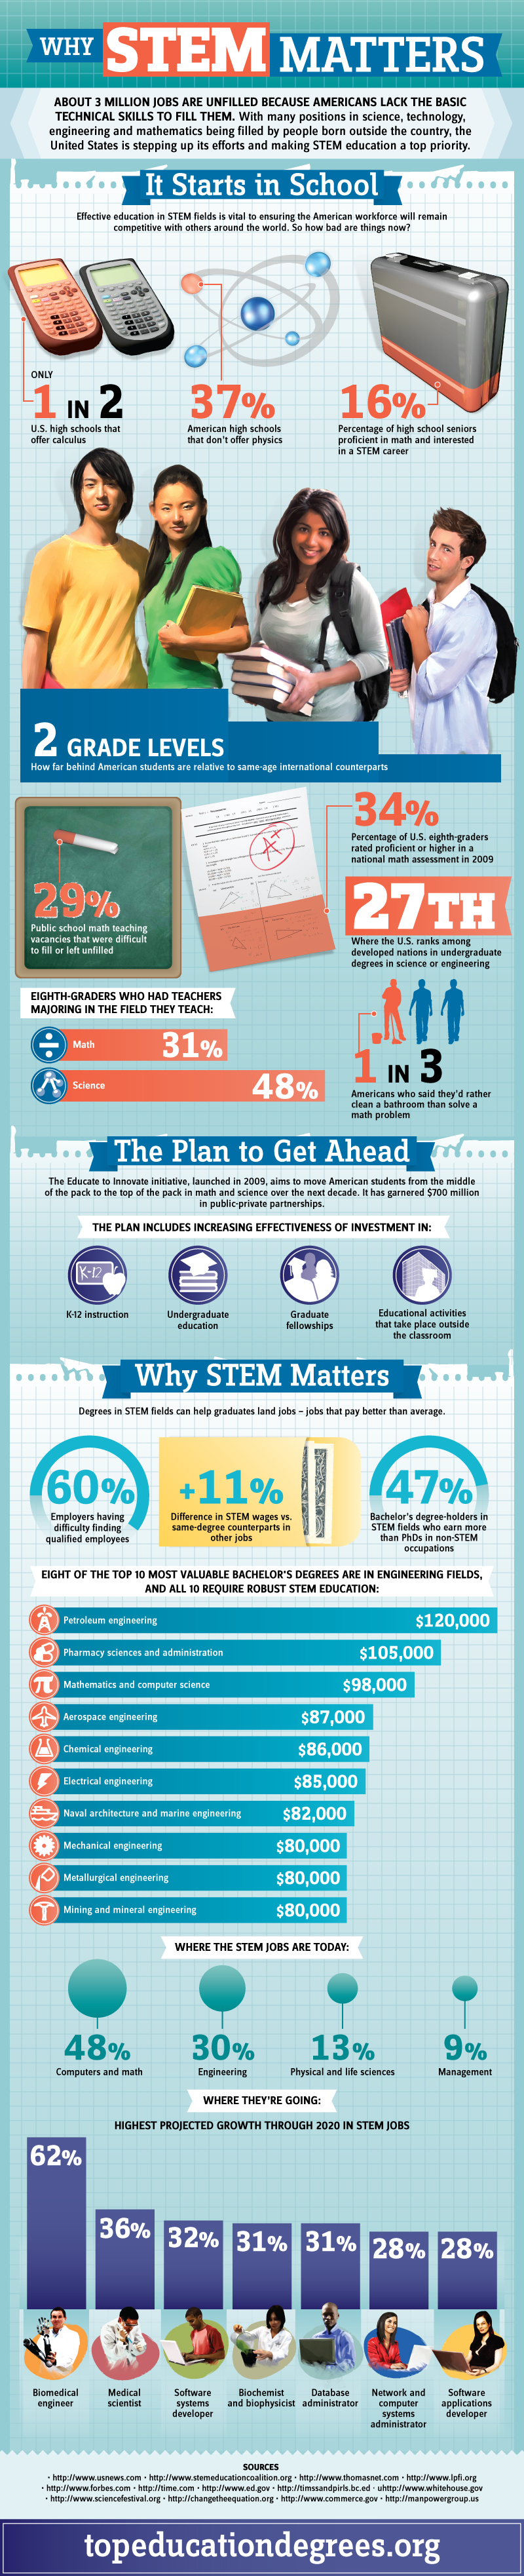 Why STEM Matters